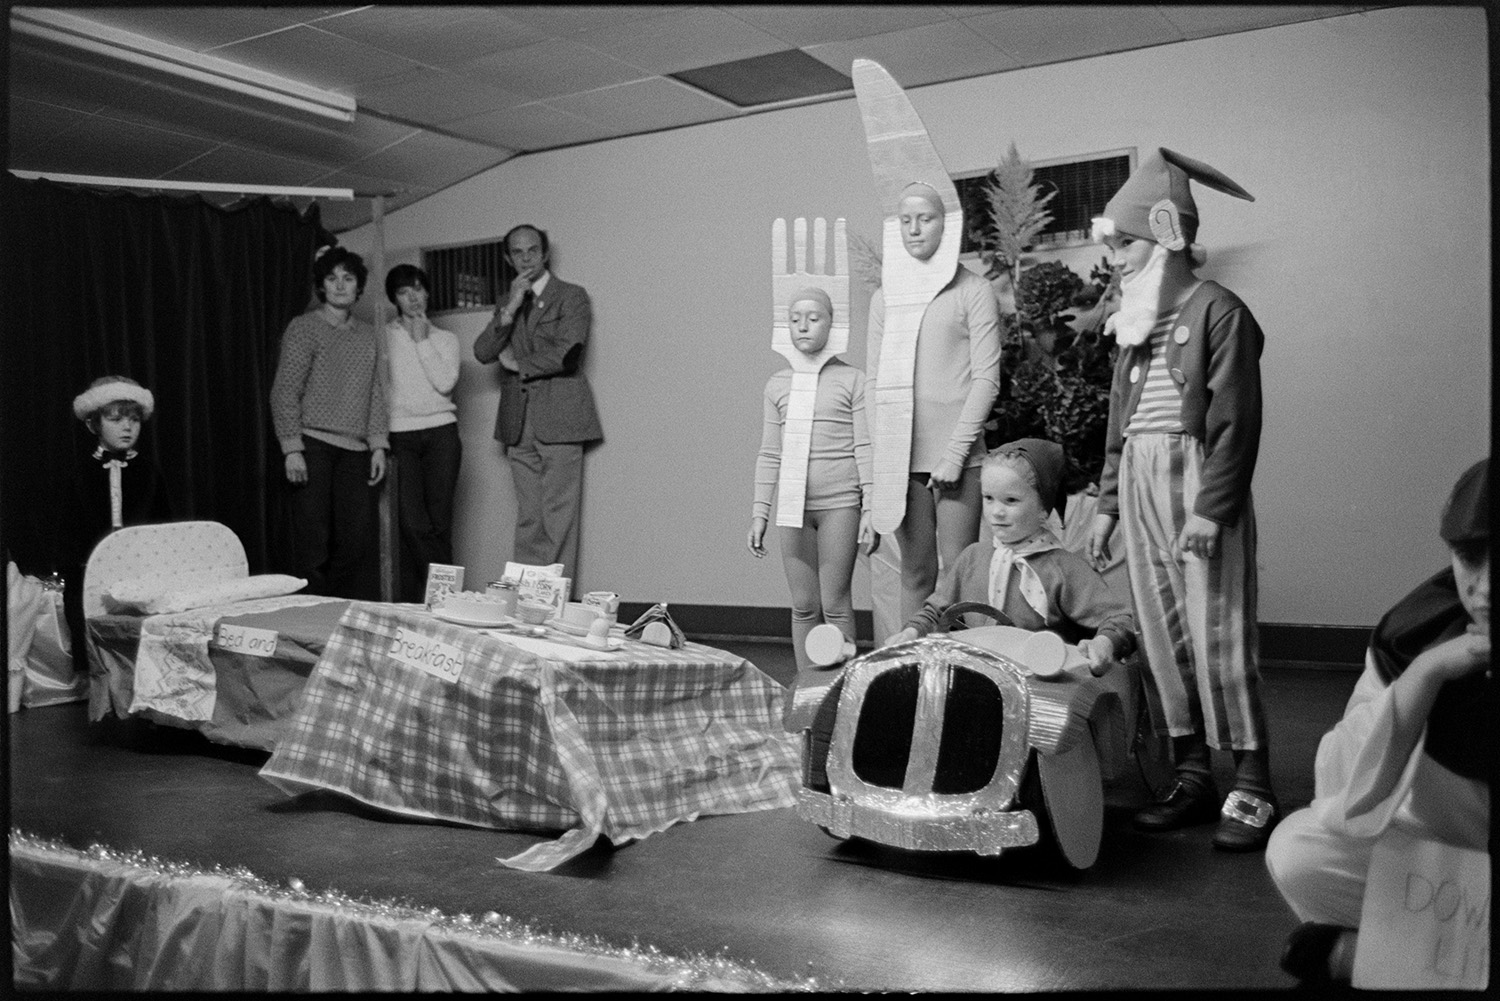 Fancy dress competition in village hall, children's King and Queen on stage. 
[Children in a fancy dress competition at Dolton Village Hall for Dolton Carnival. Two children are dressed as Noddy and Big Ears, while two other children are dressed as a knife and fork next to a model bed and table laid for breakfast.]